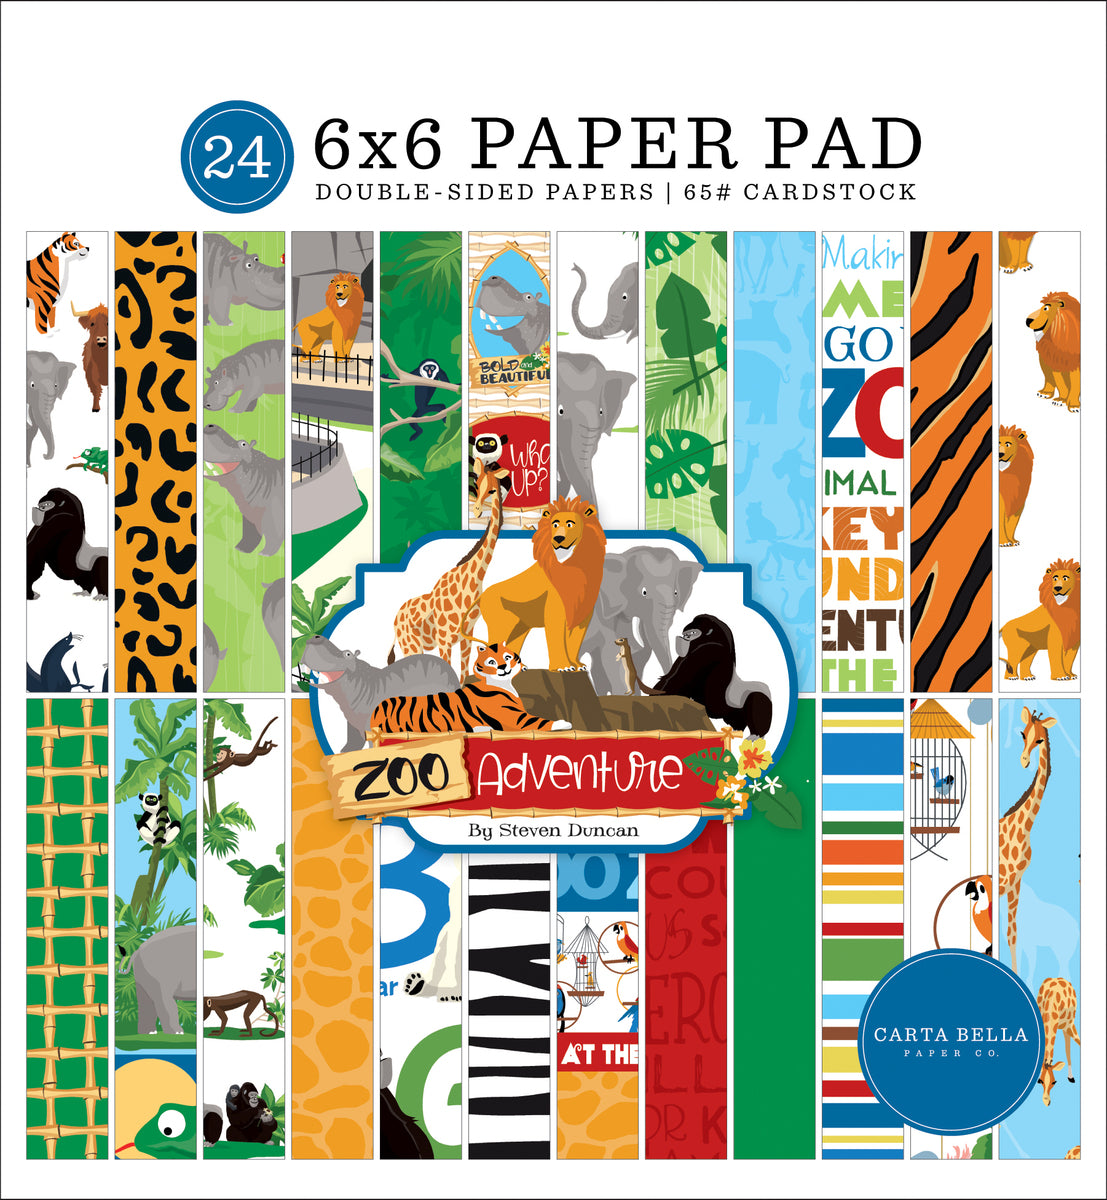 ZOO ADVENTURE - 6x6 pad with 24 patterned papers about the zoo - Carta Bella Paper